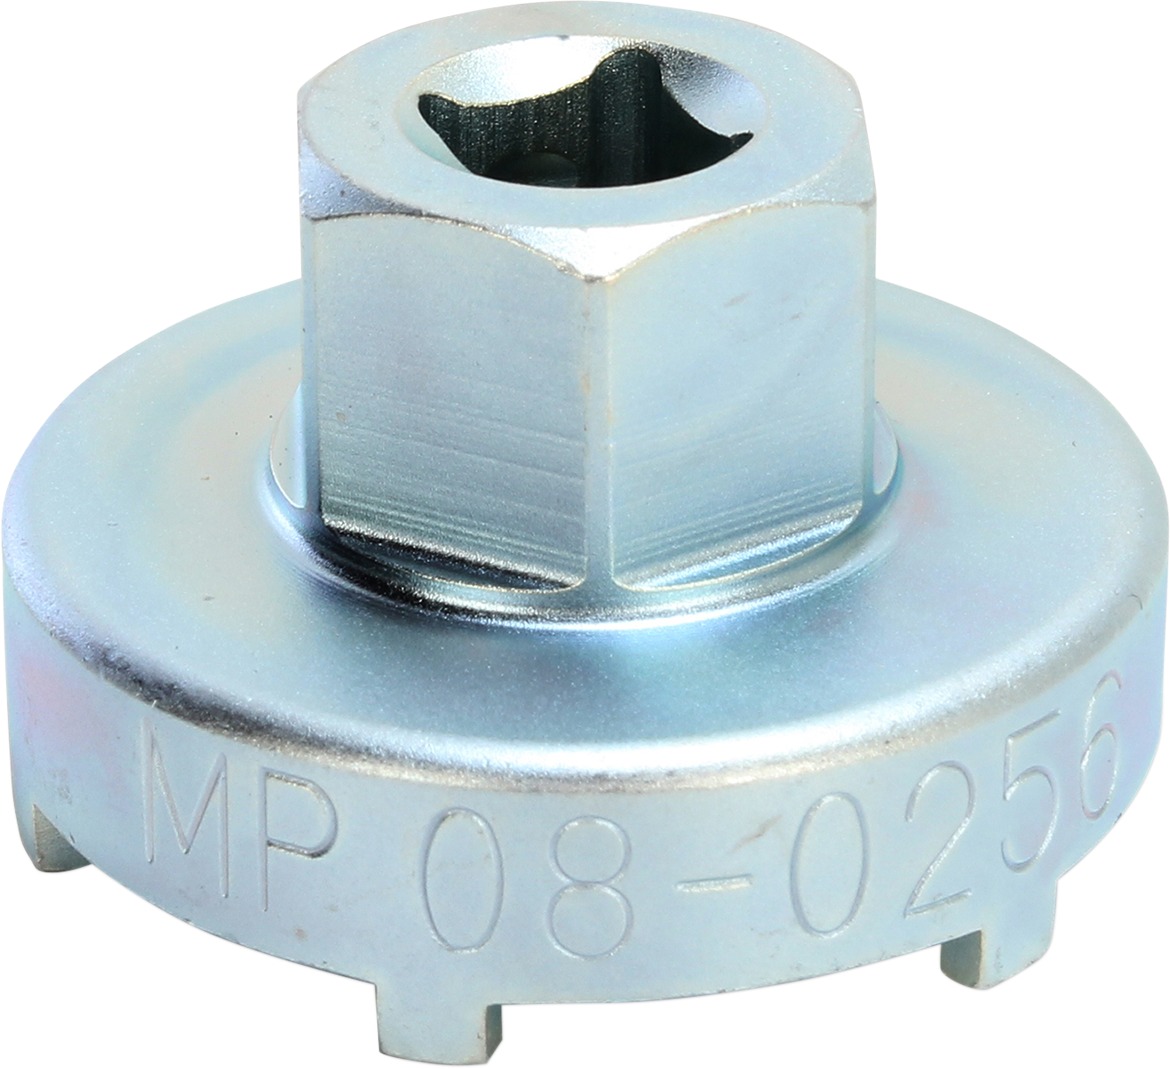 47mm Wheel Bearing Retainer Tool - Replaces 07HMA-KS70100 & 07YMA-KZ40100 - For 6 Pin 2000 & Up CR125, CR250, CRF250, & CRF450 - Click Image to Close